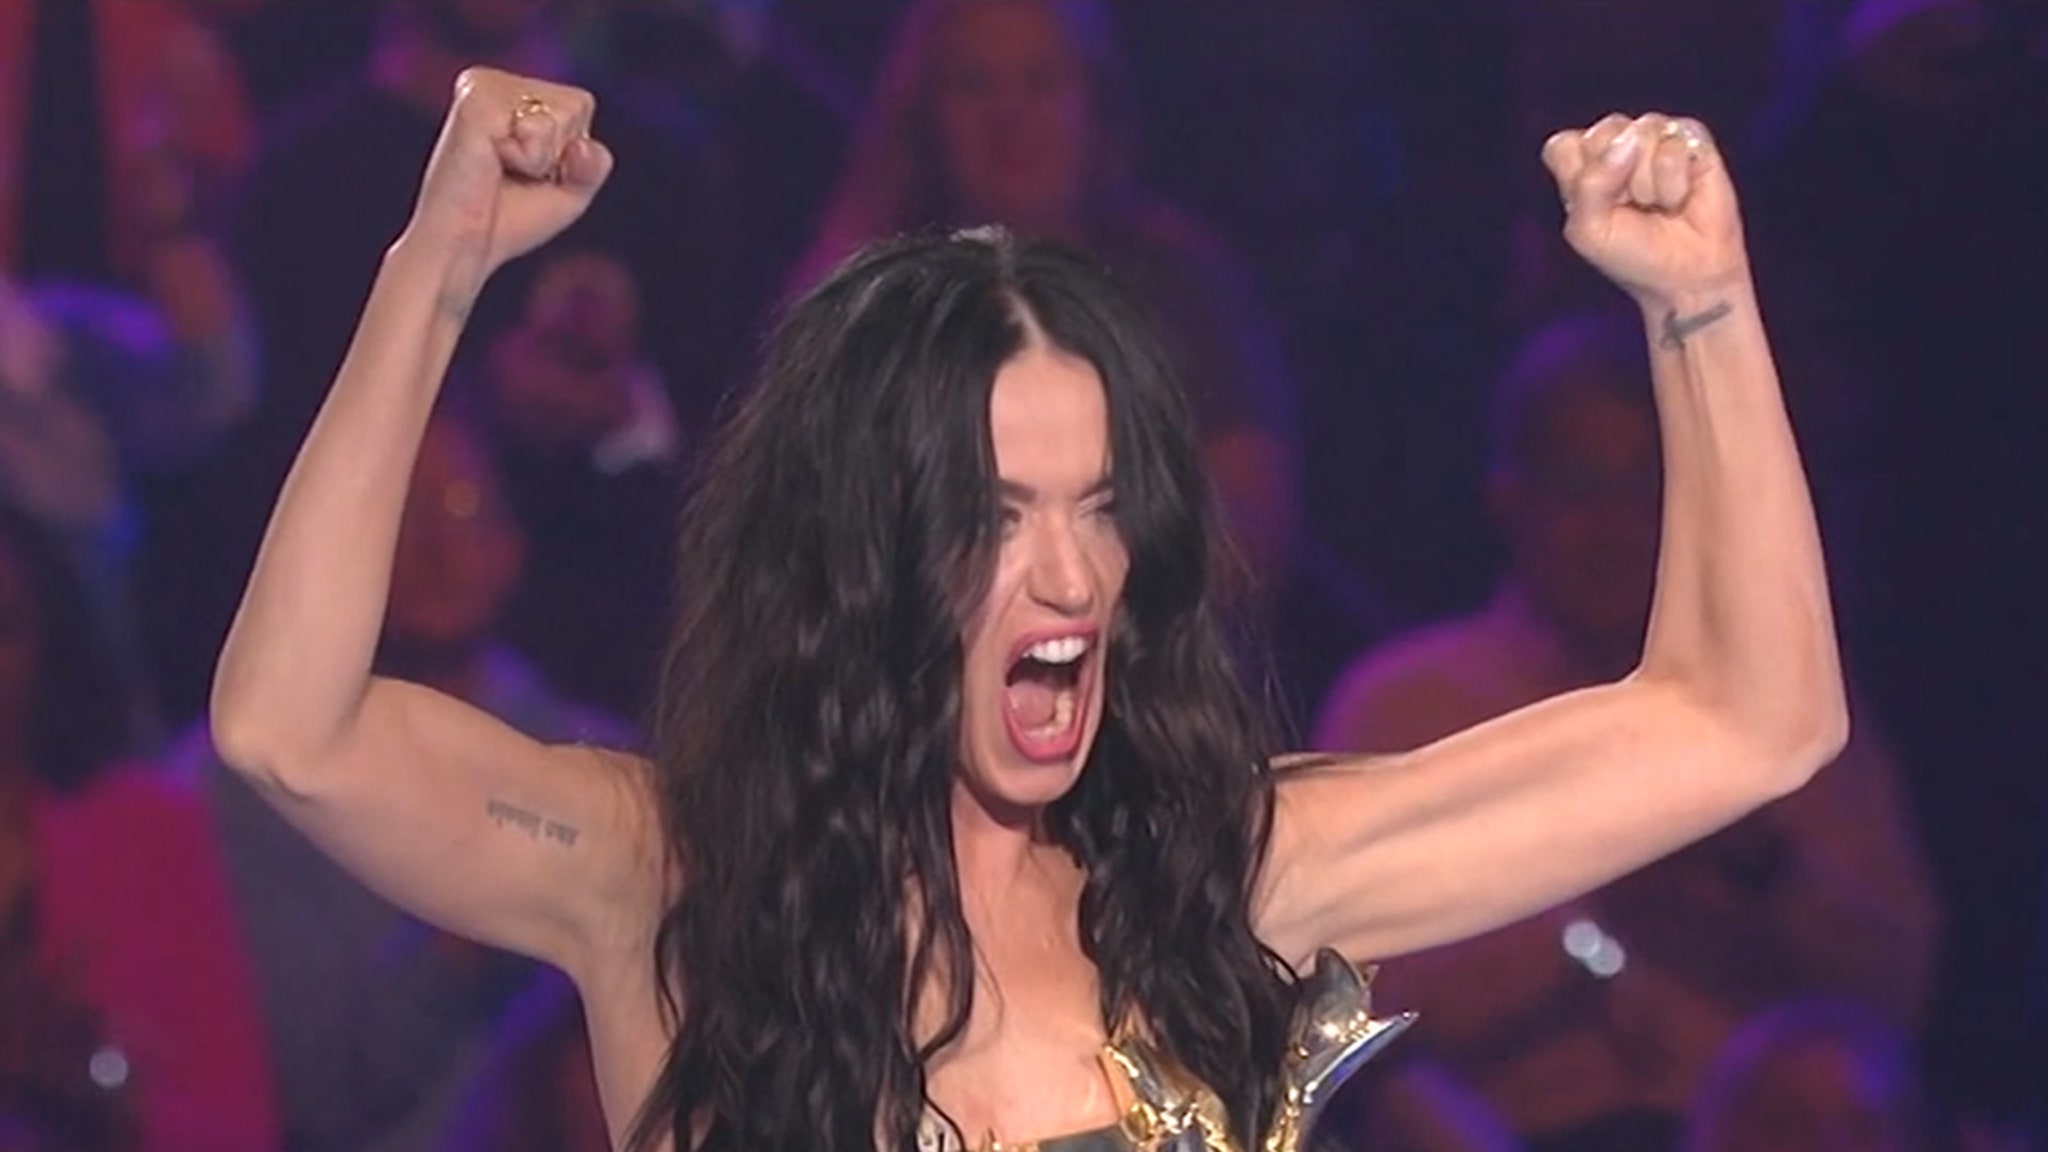 Katy Perry Gets Awesome 'American Idol' Tribute on Her Final Episode